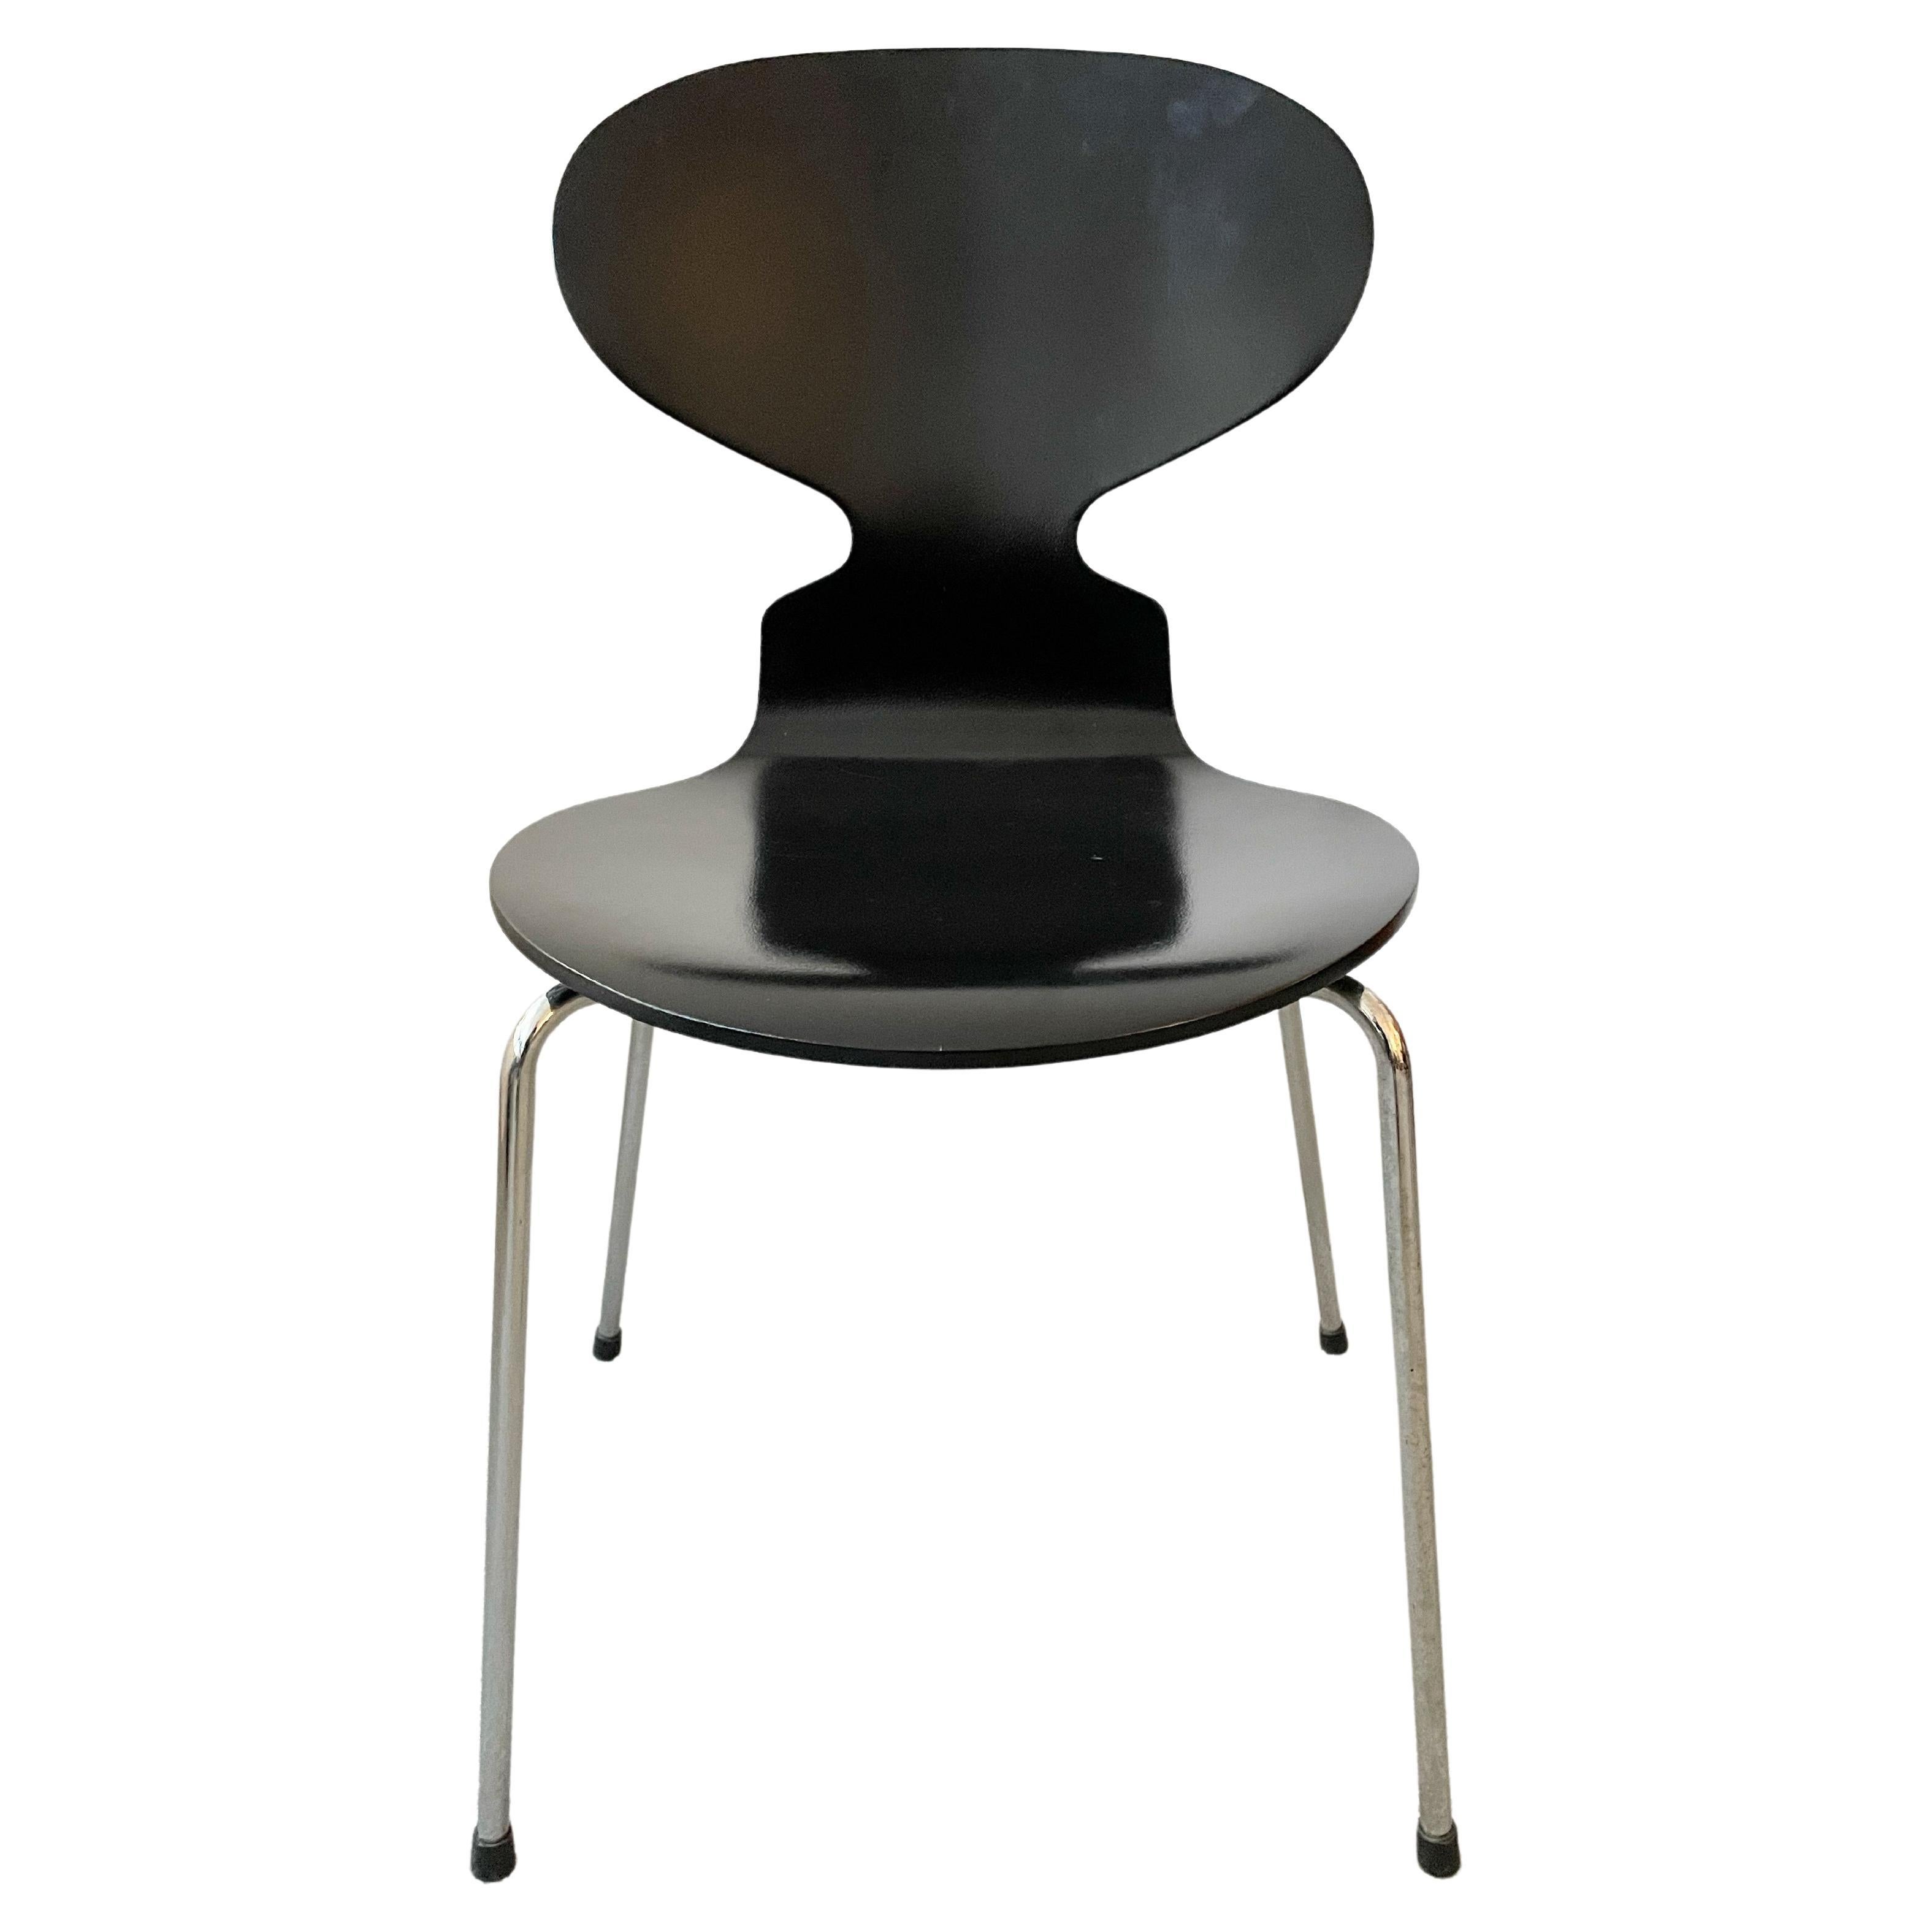 Black Ant chair by Arne Jacobsen for Fritz Hansen. The official name of the chair is model 3101', but they are also called 'the Ant'. Made of black lacquered plywood.